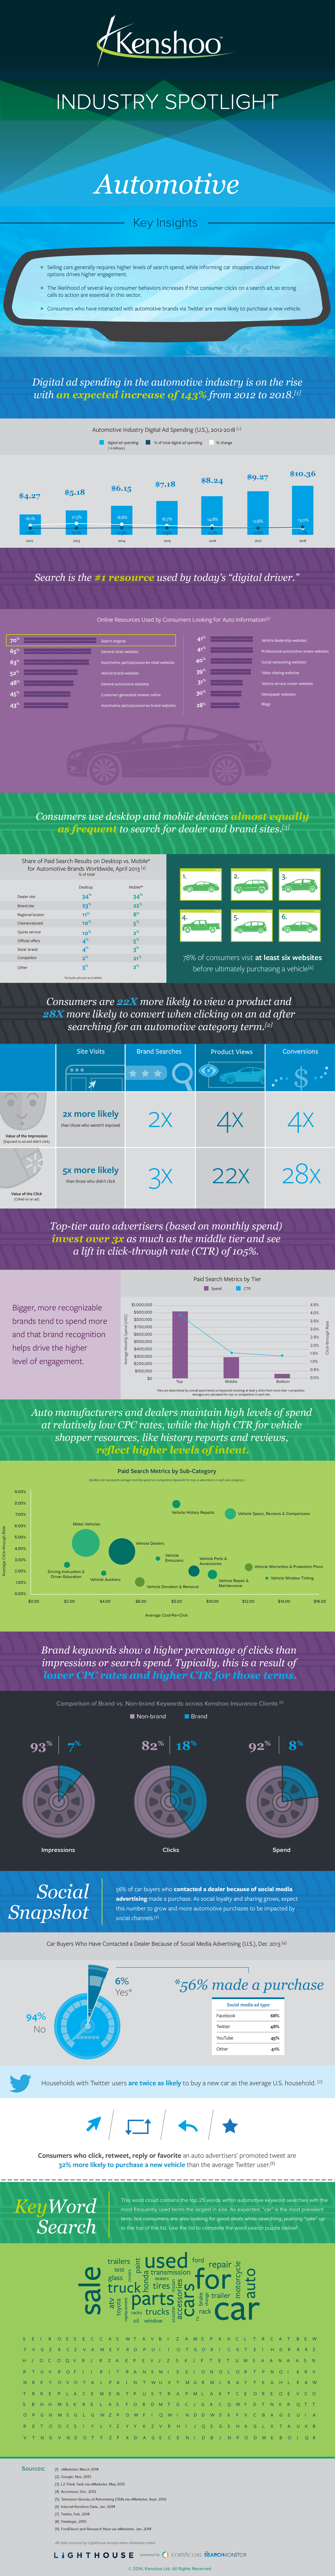 Search Monitor Automotive PPC Trends Infographic